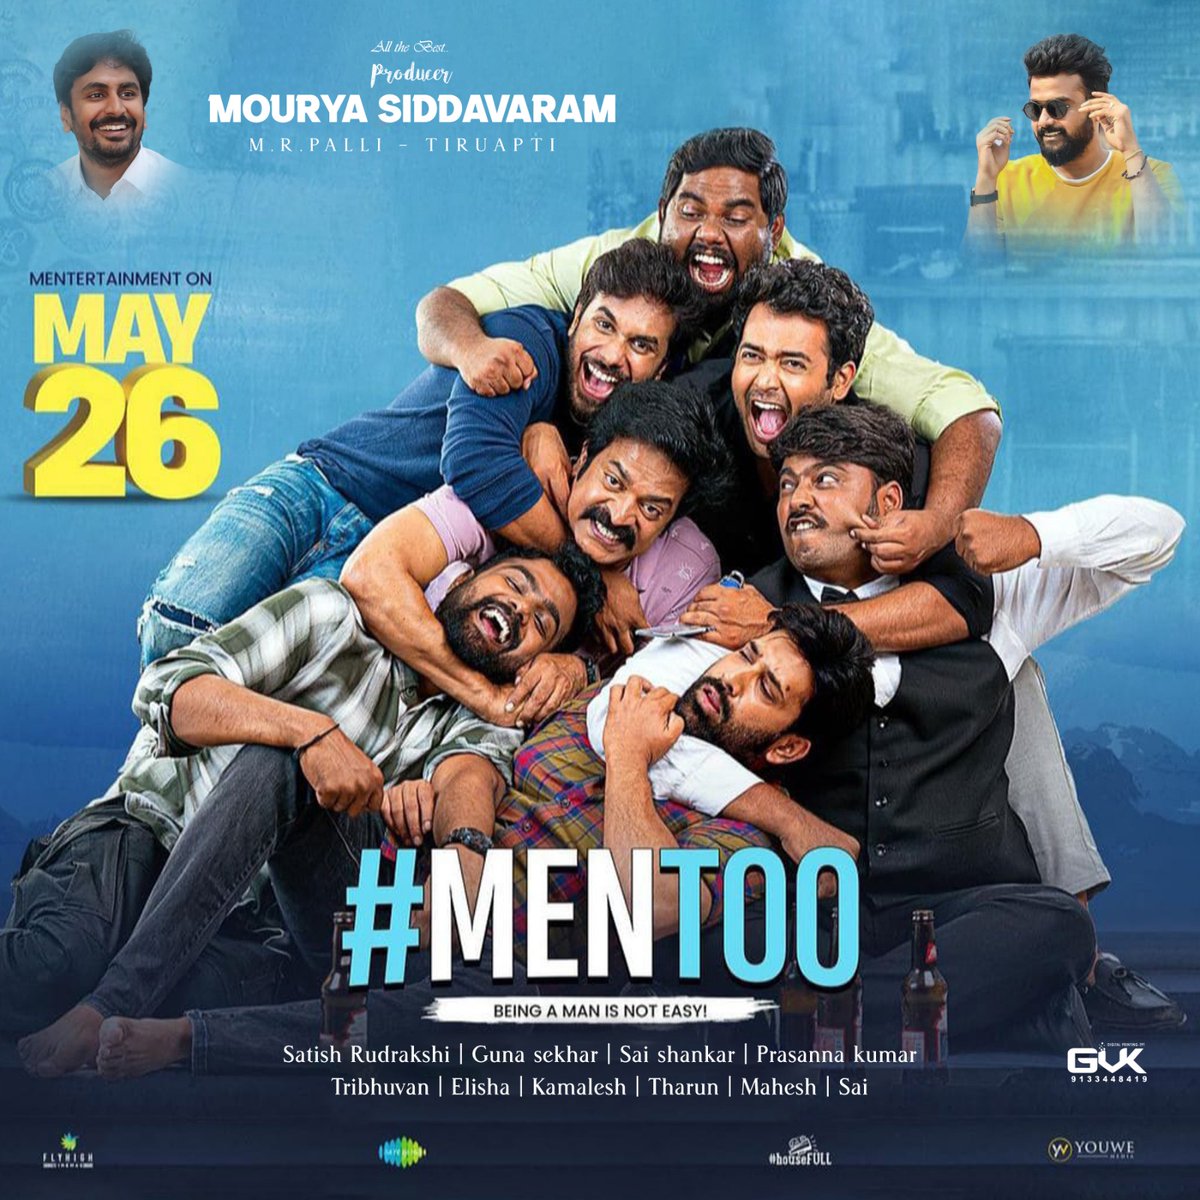 Just 5 Hours To Go.... Can't Wait Much 
#Mentoo Grand Release Today..... #May26 @PriyankaOffl @Itsmytirupati @JHopper21 @mouryasiddhavaram